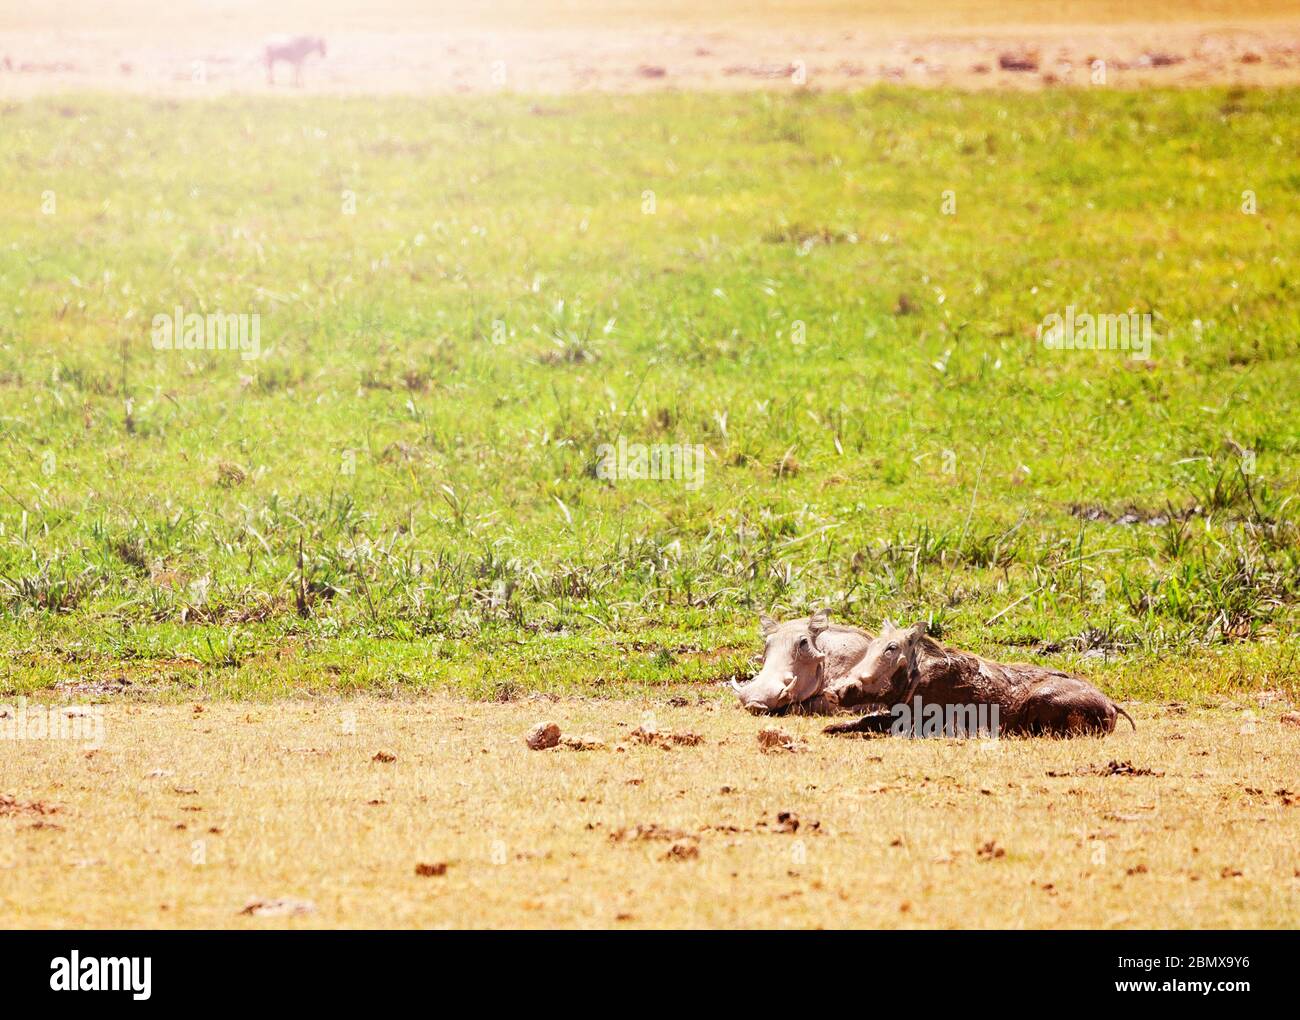 Two warthogs pigs or Phacochoerus lay in the mud puddle Kenya savanna, Africa Stock Photo